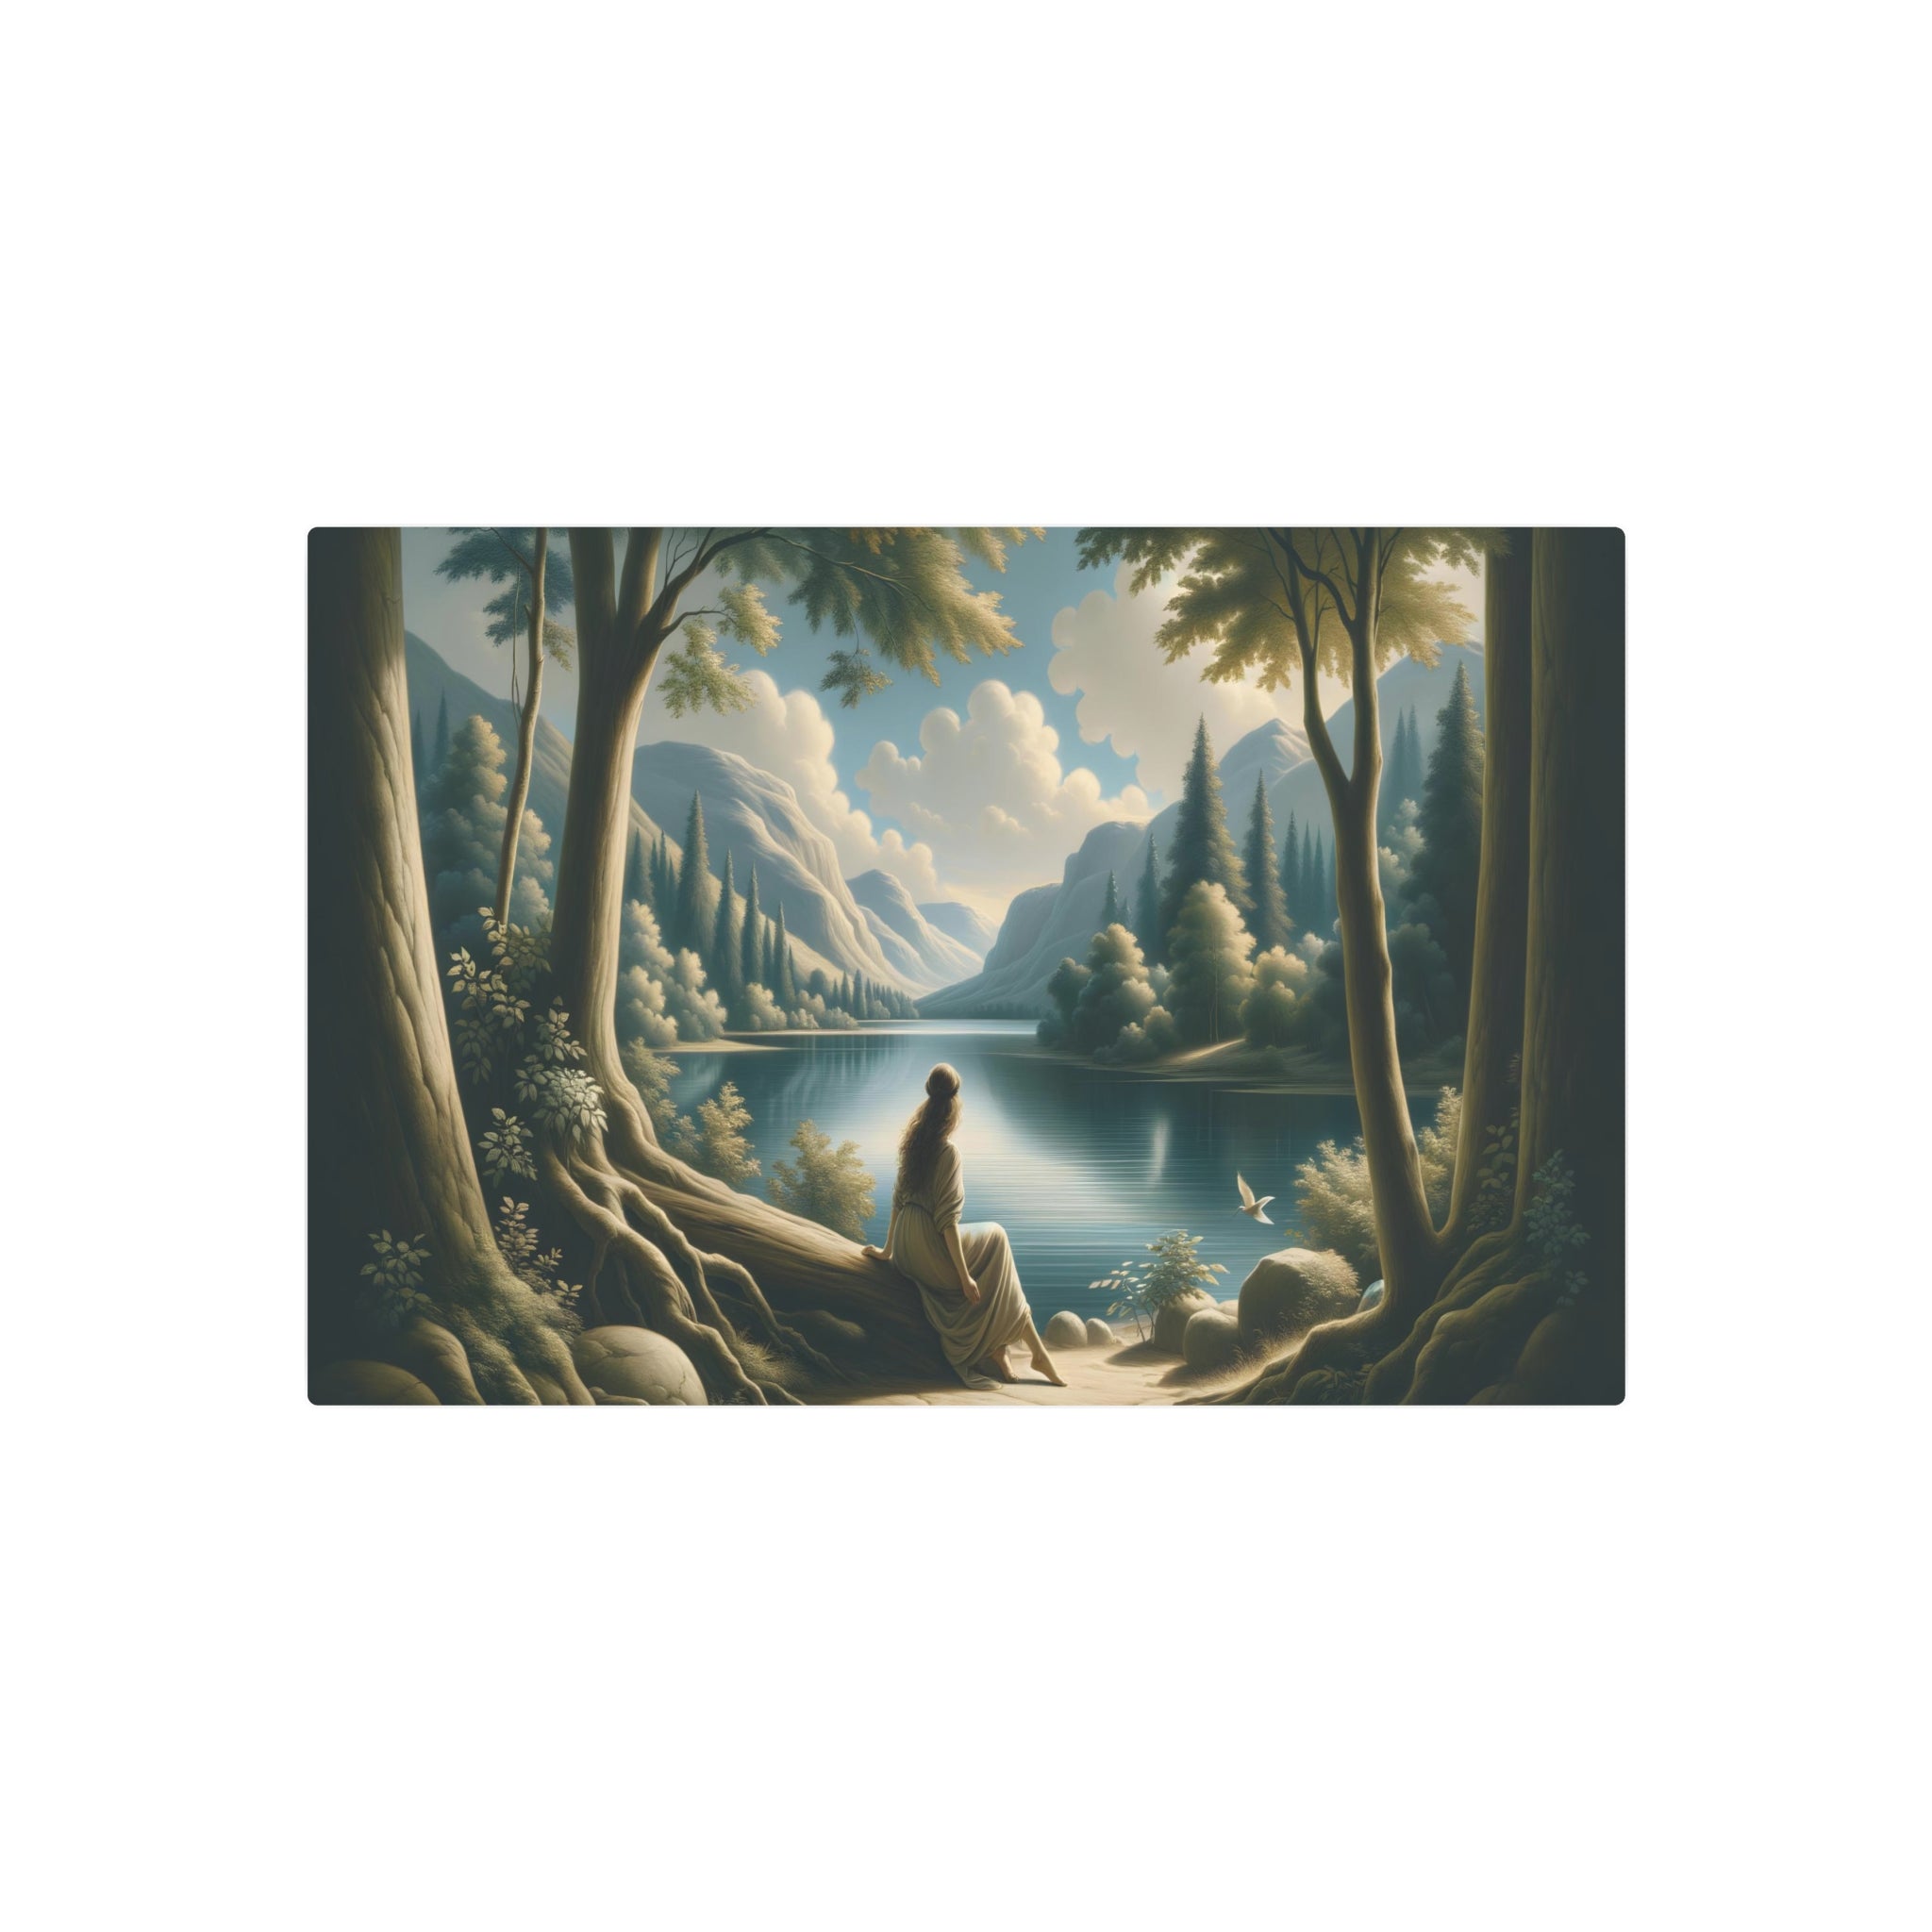 Metal Poster Art | "Renaissance Style Artwork: Serene Lake Scene with Woman - Western Art Styles Collection"